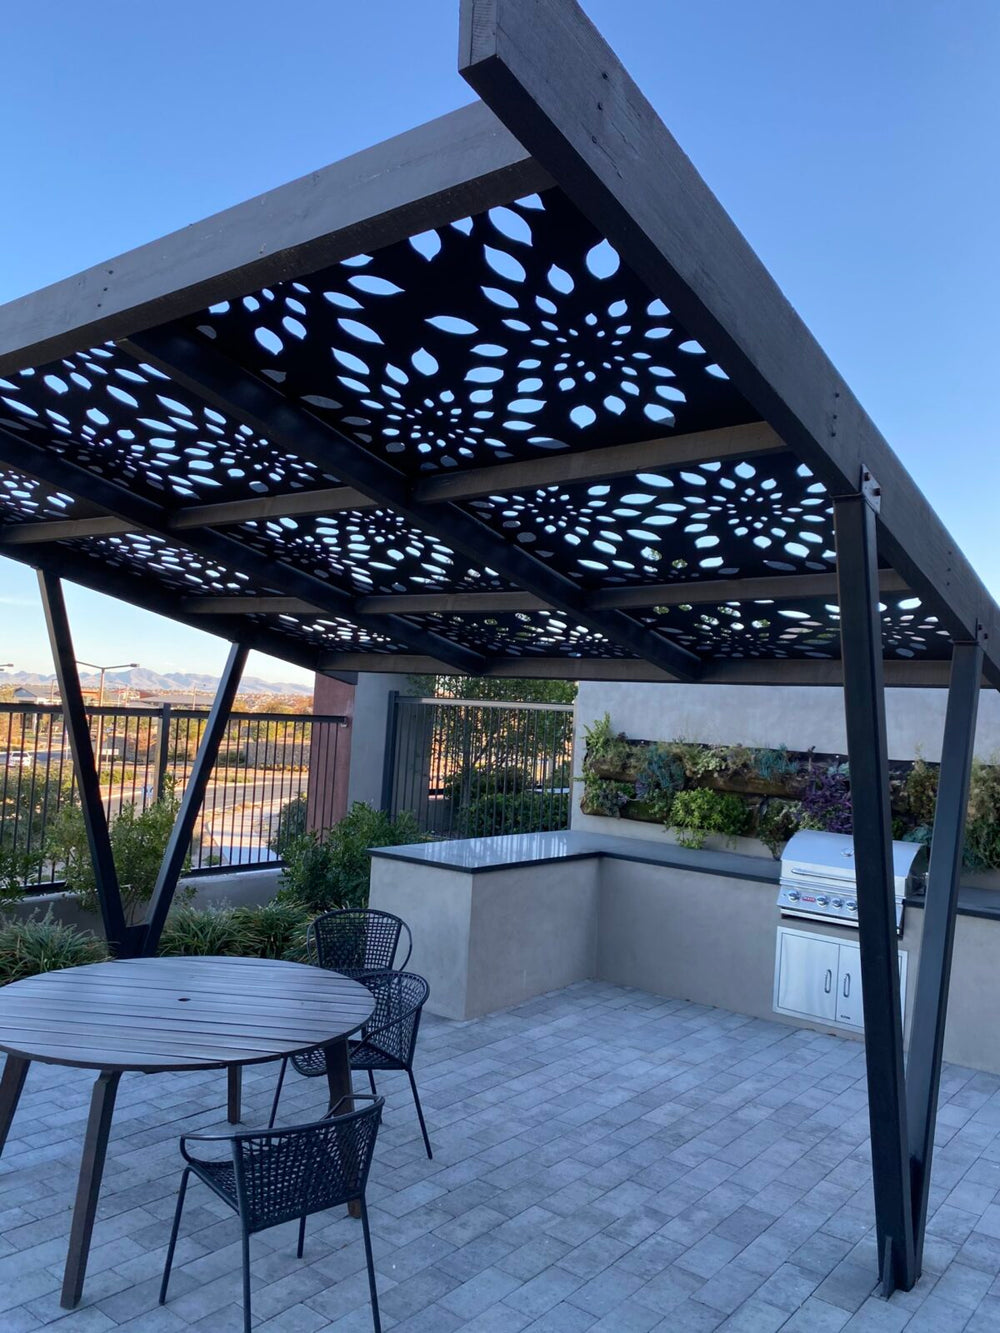 Decorative Laser Cut Metal Pergola Outdoor Space Sunshade Panel |Classic Fabrication Heavy Duty Metal Privacy Panel | Made in Canada – Model # PP586